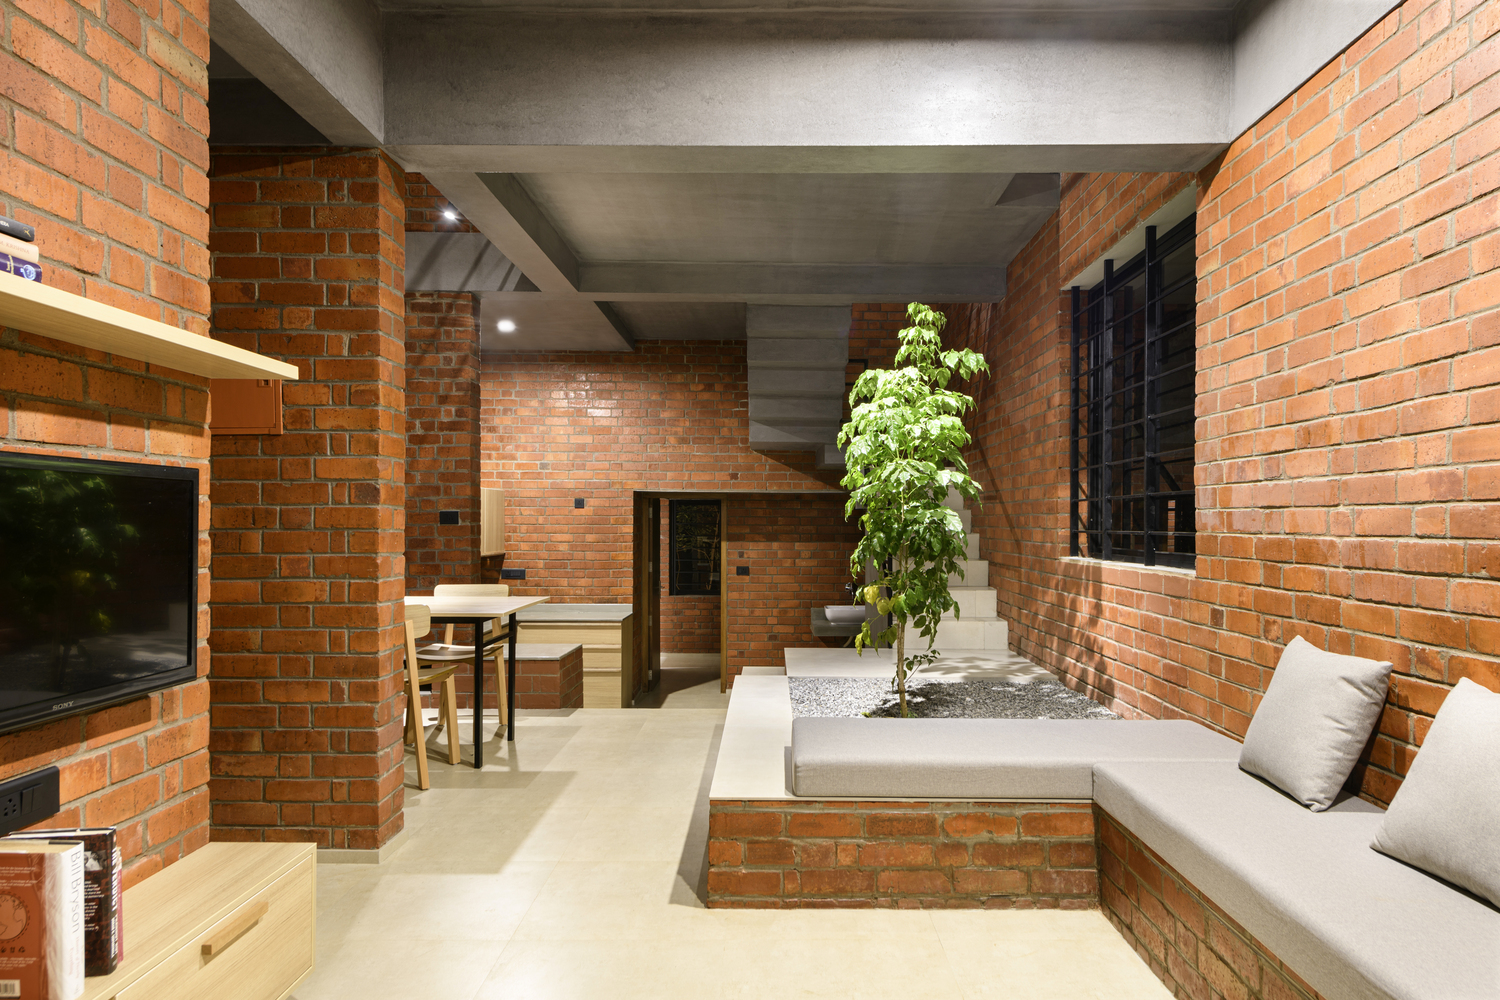 Srijit Srinivas Clever Solution in Using Limited Land To Become a Functional Brick House